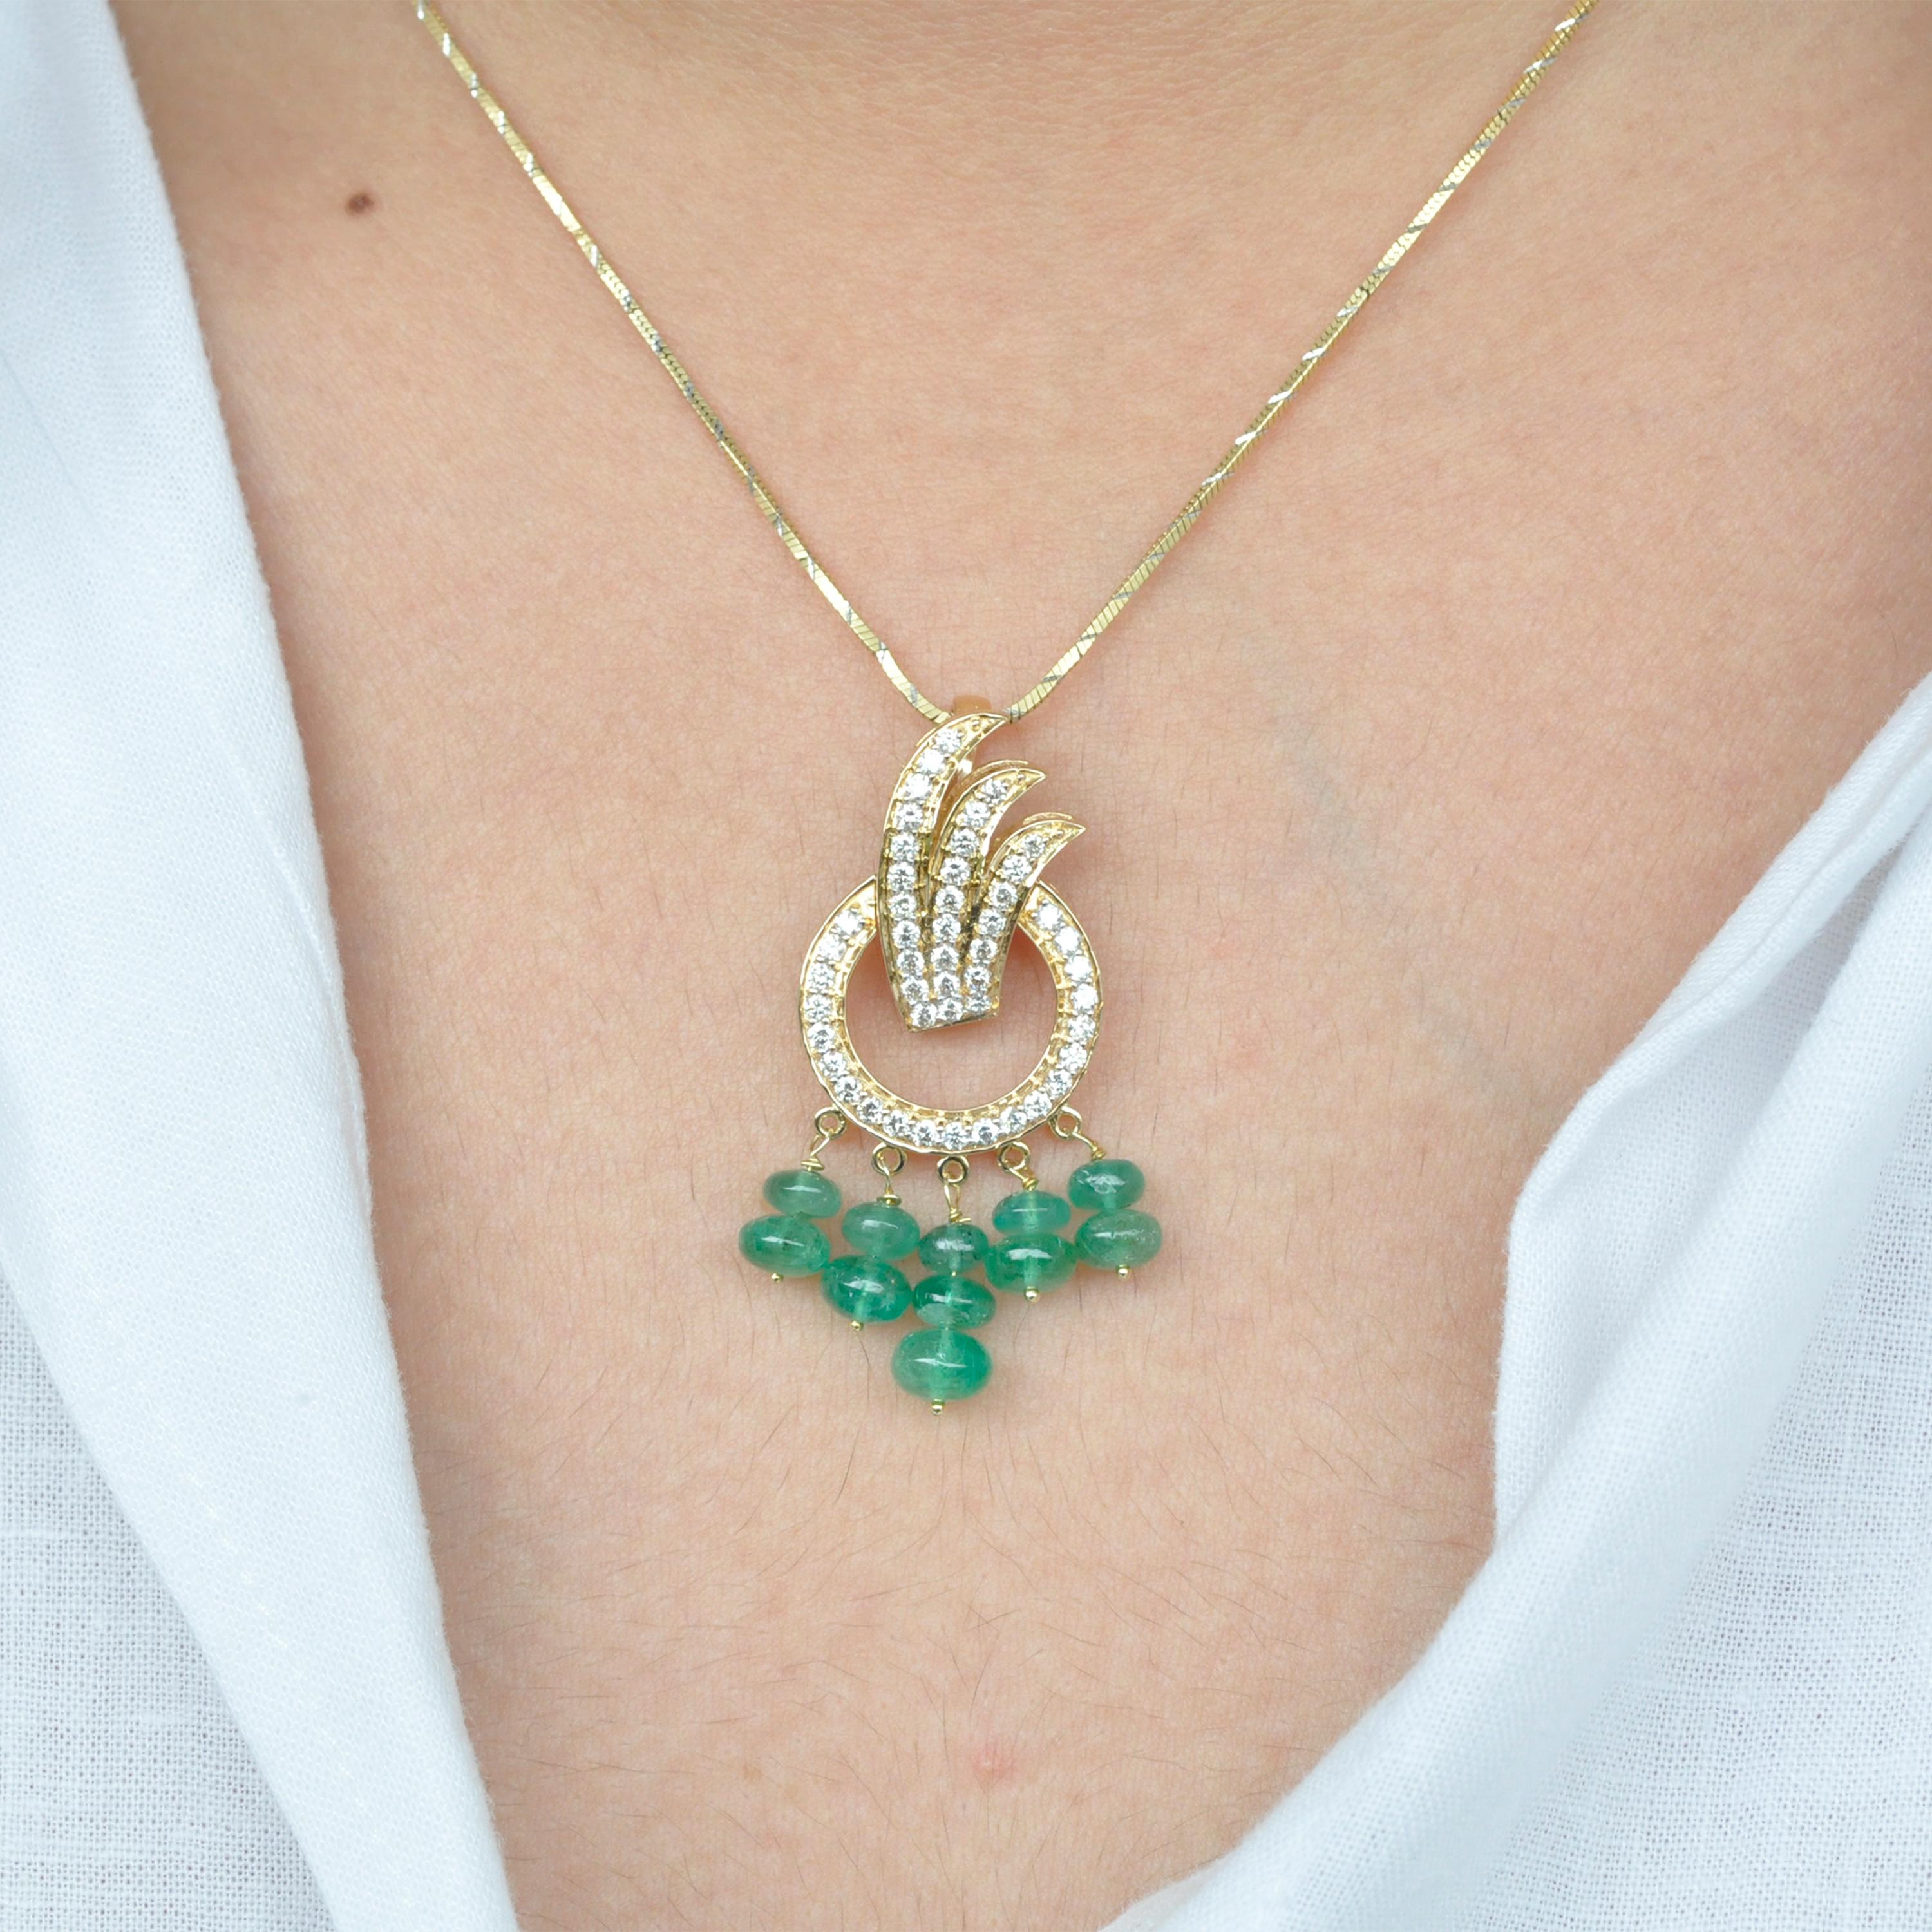 18 karat yellow gold diamond zambian emerald beads pendant necklace

This 18 karat gold pendant necklace is a handcrafted contemporary beauty. The pendant depicts three diamond feathers encircled by a diamond ring. A touch of green added by the